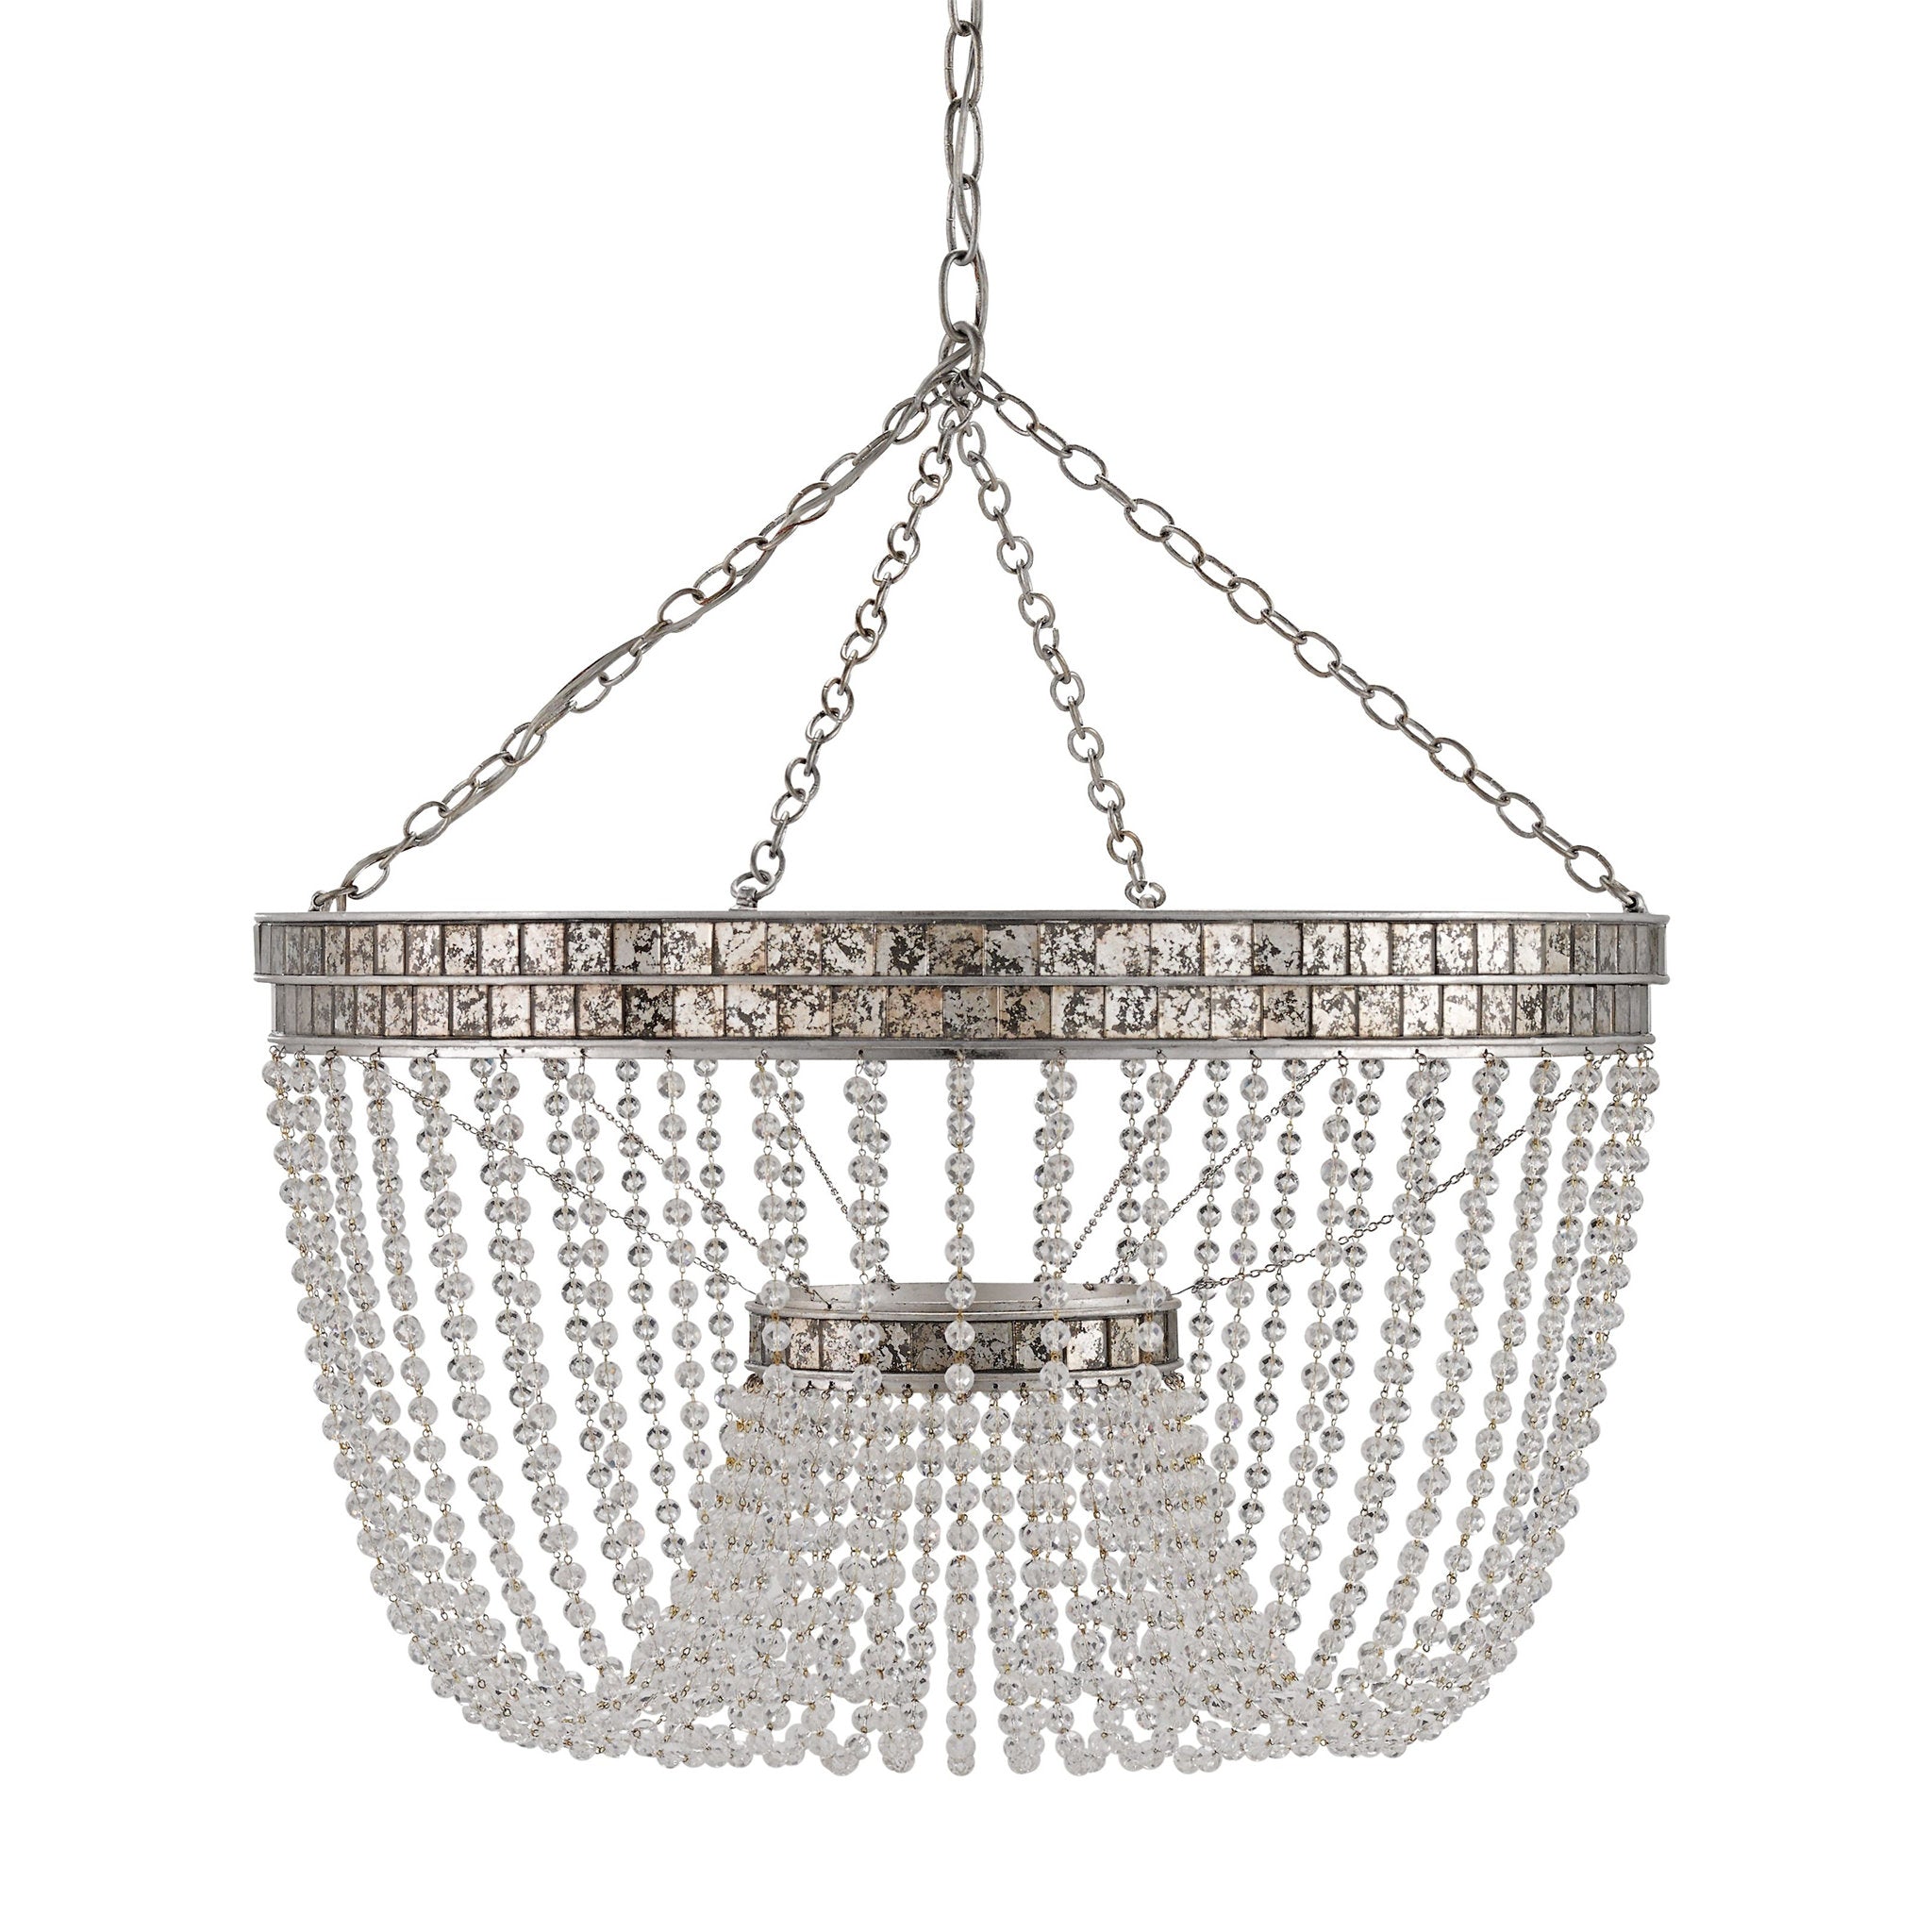 Highbrow Beaded Glass Chandelier - Contemporary Silver Leaf/Distressed Silver Leaf